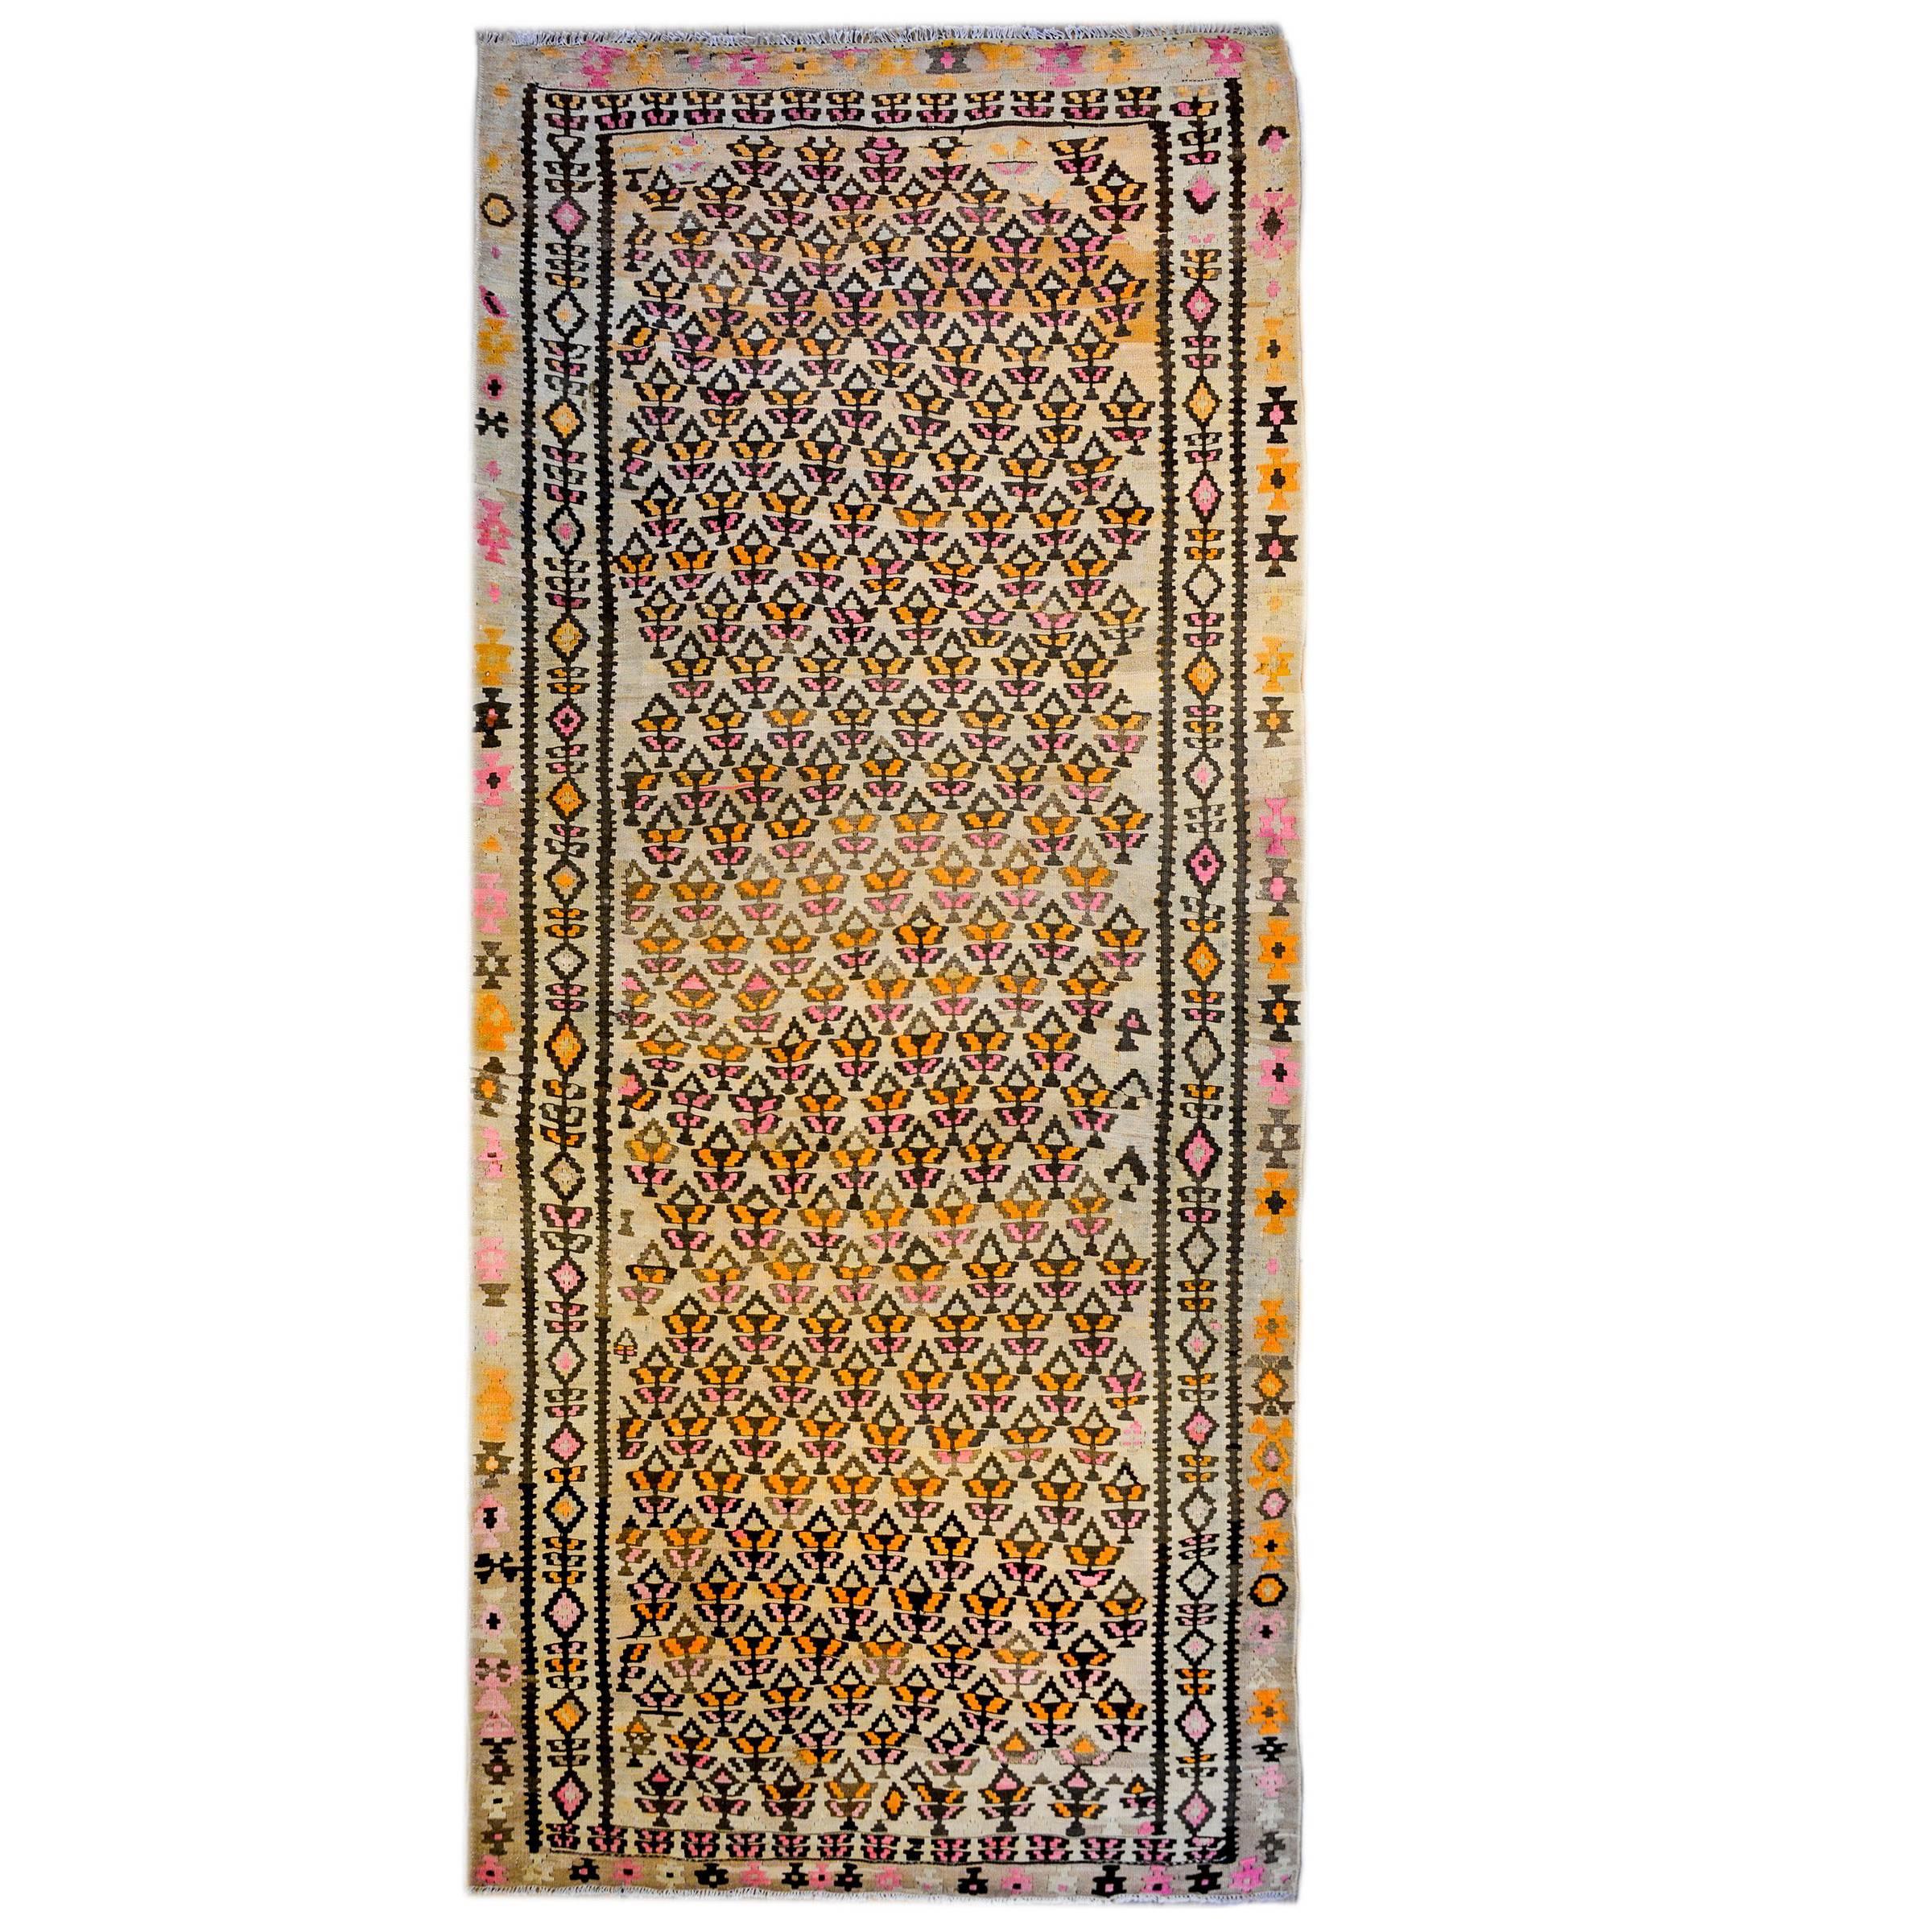 Exceptional Early 20th Century Qazvin Kilim Runner For Sale